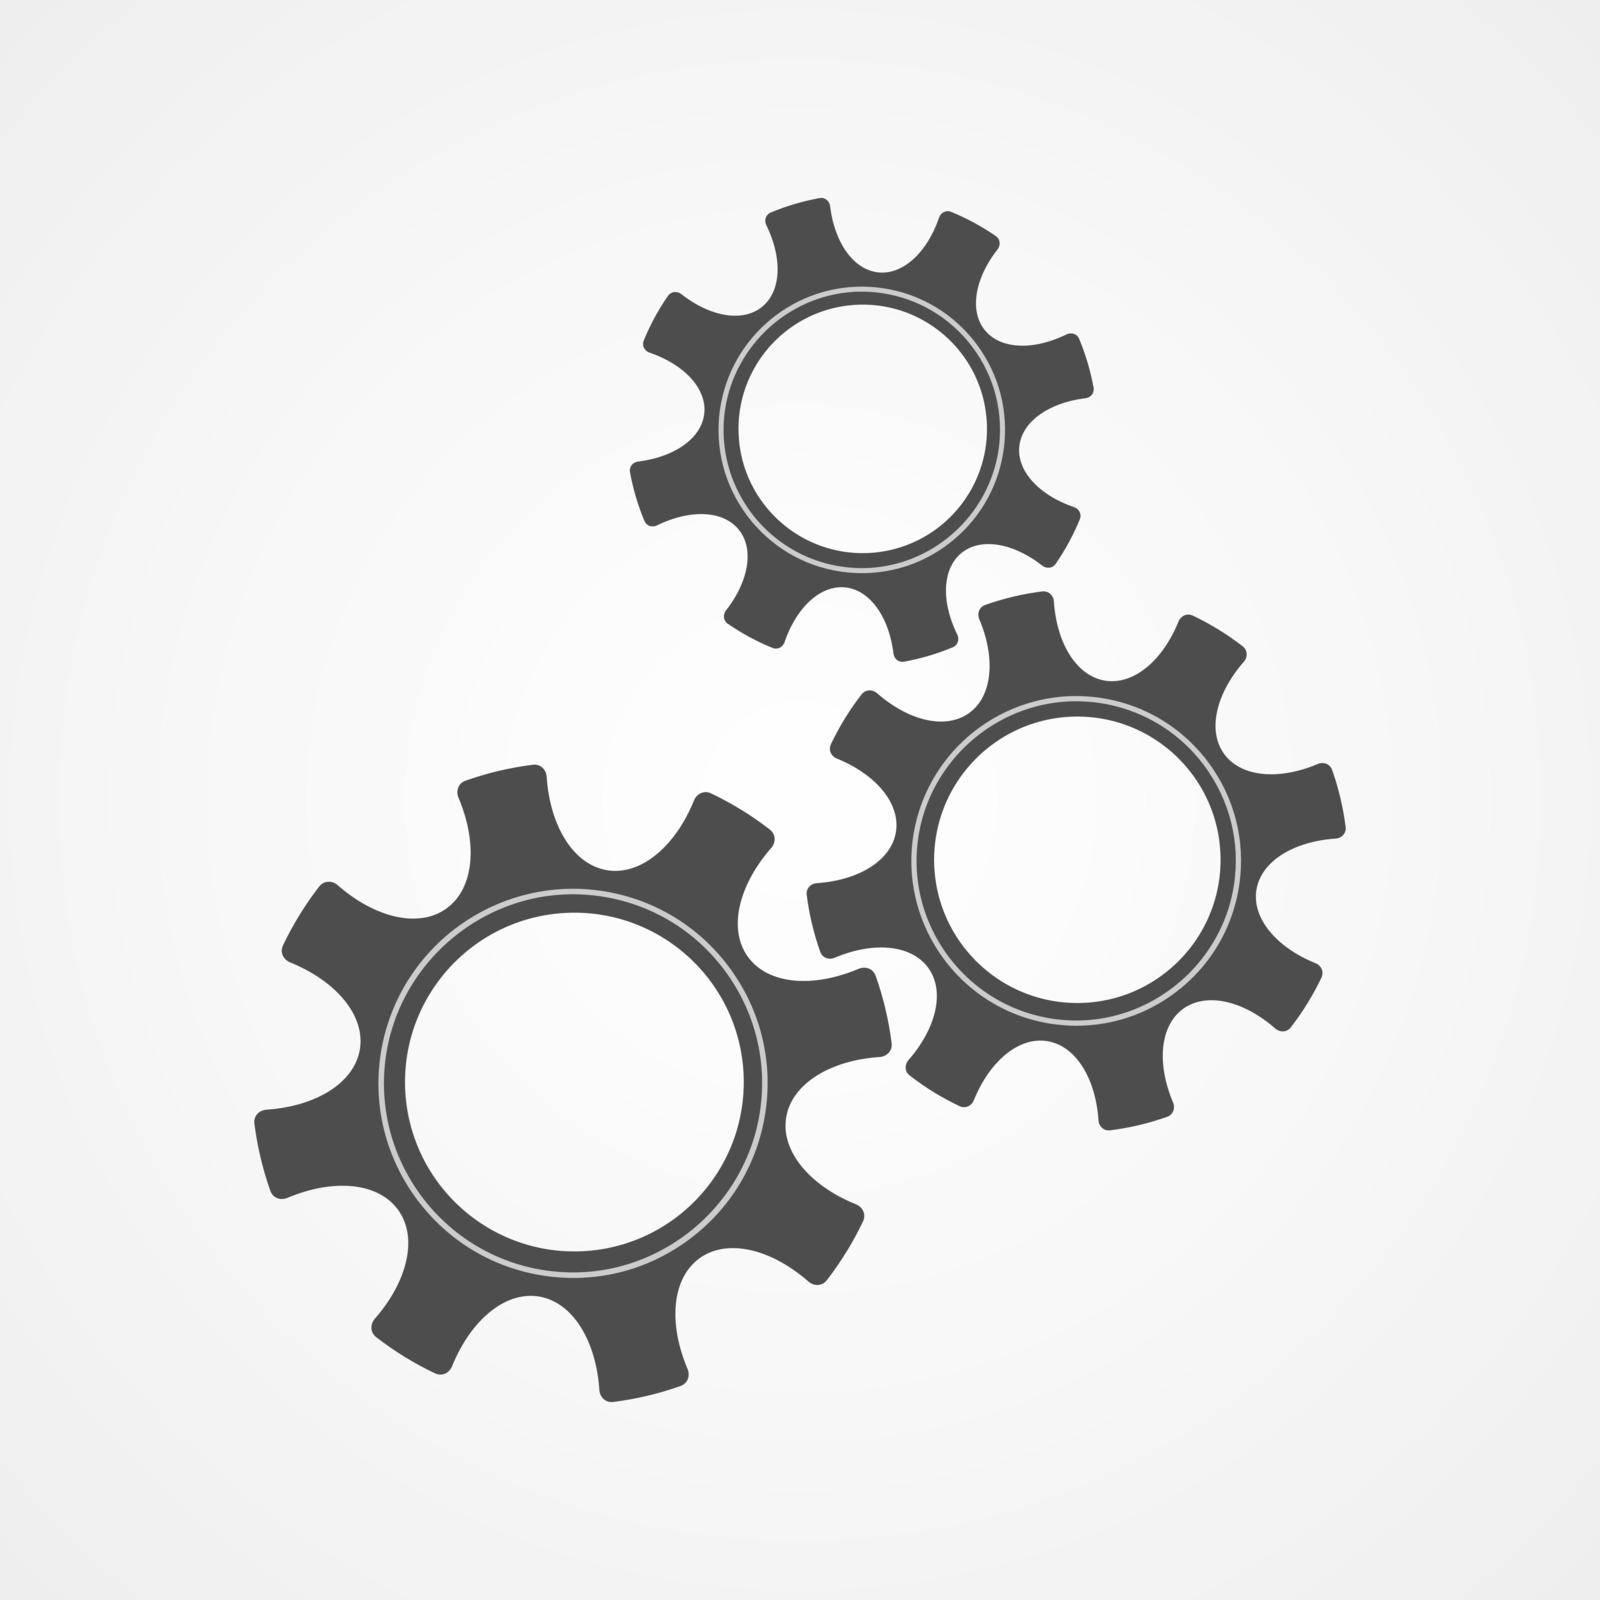 Teamwork concept gray silhouette cog and gear by moonnoon